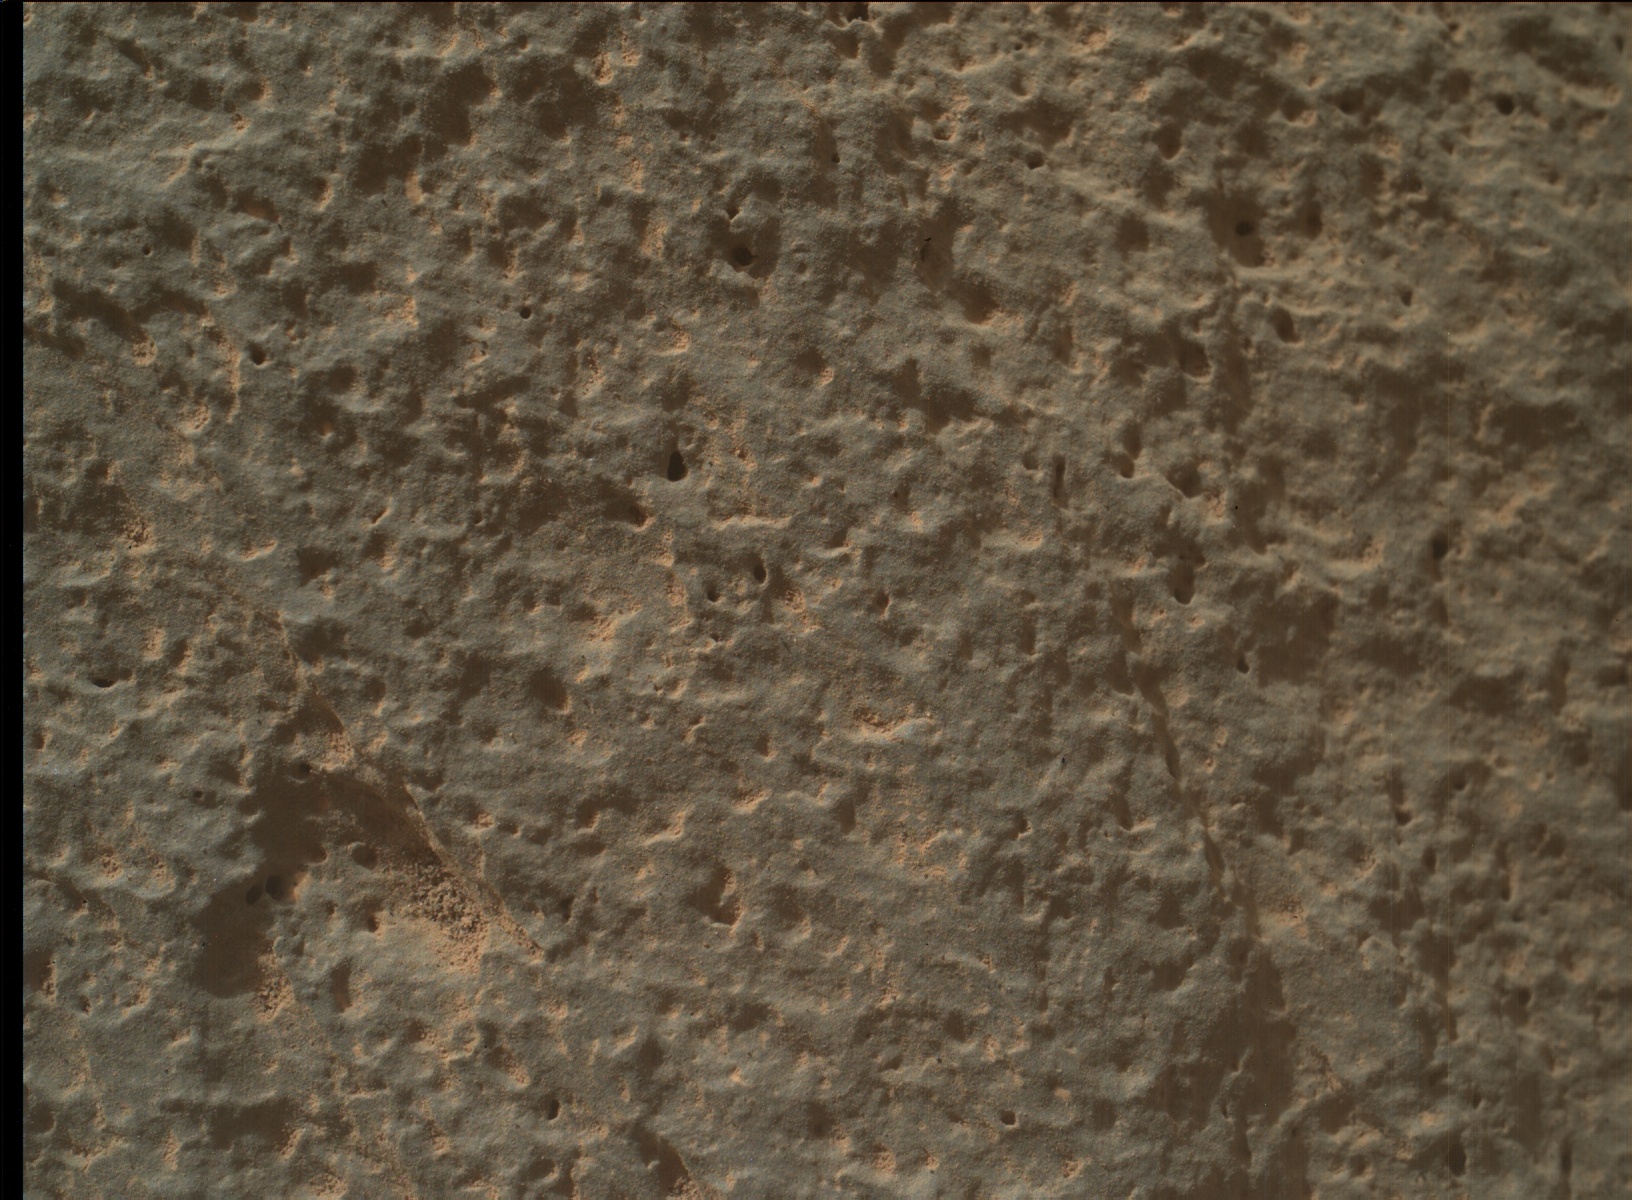 Nasa's Mars rover Curiosity acquired this image using its Mars Hand Lens Imager (MAHLI) on Sol 3432